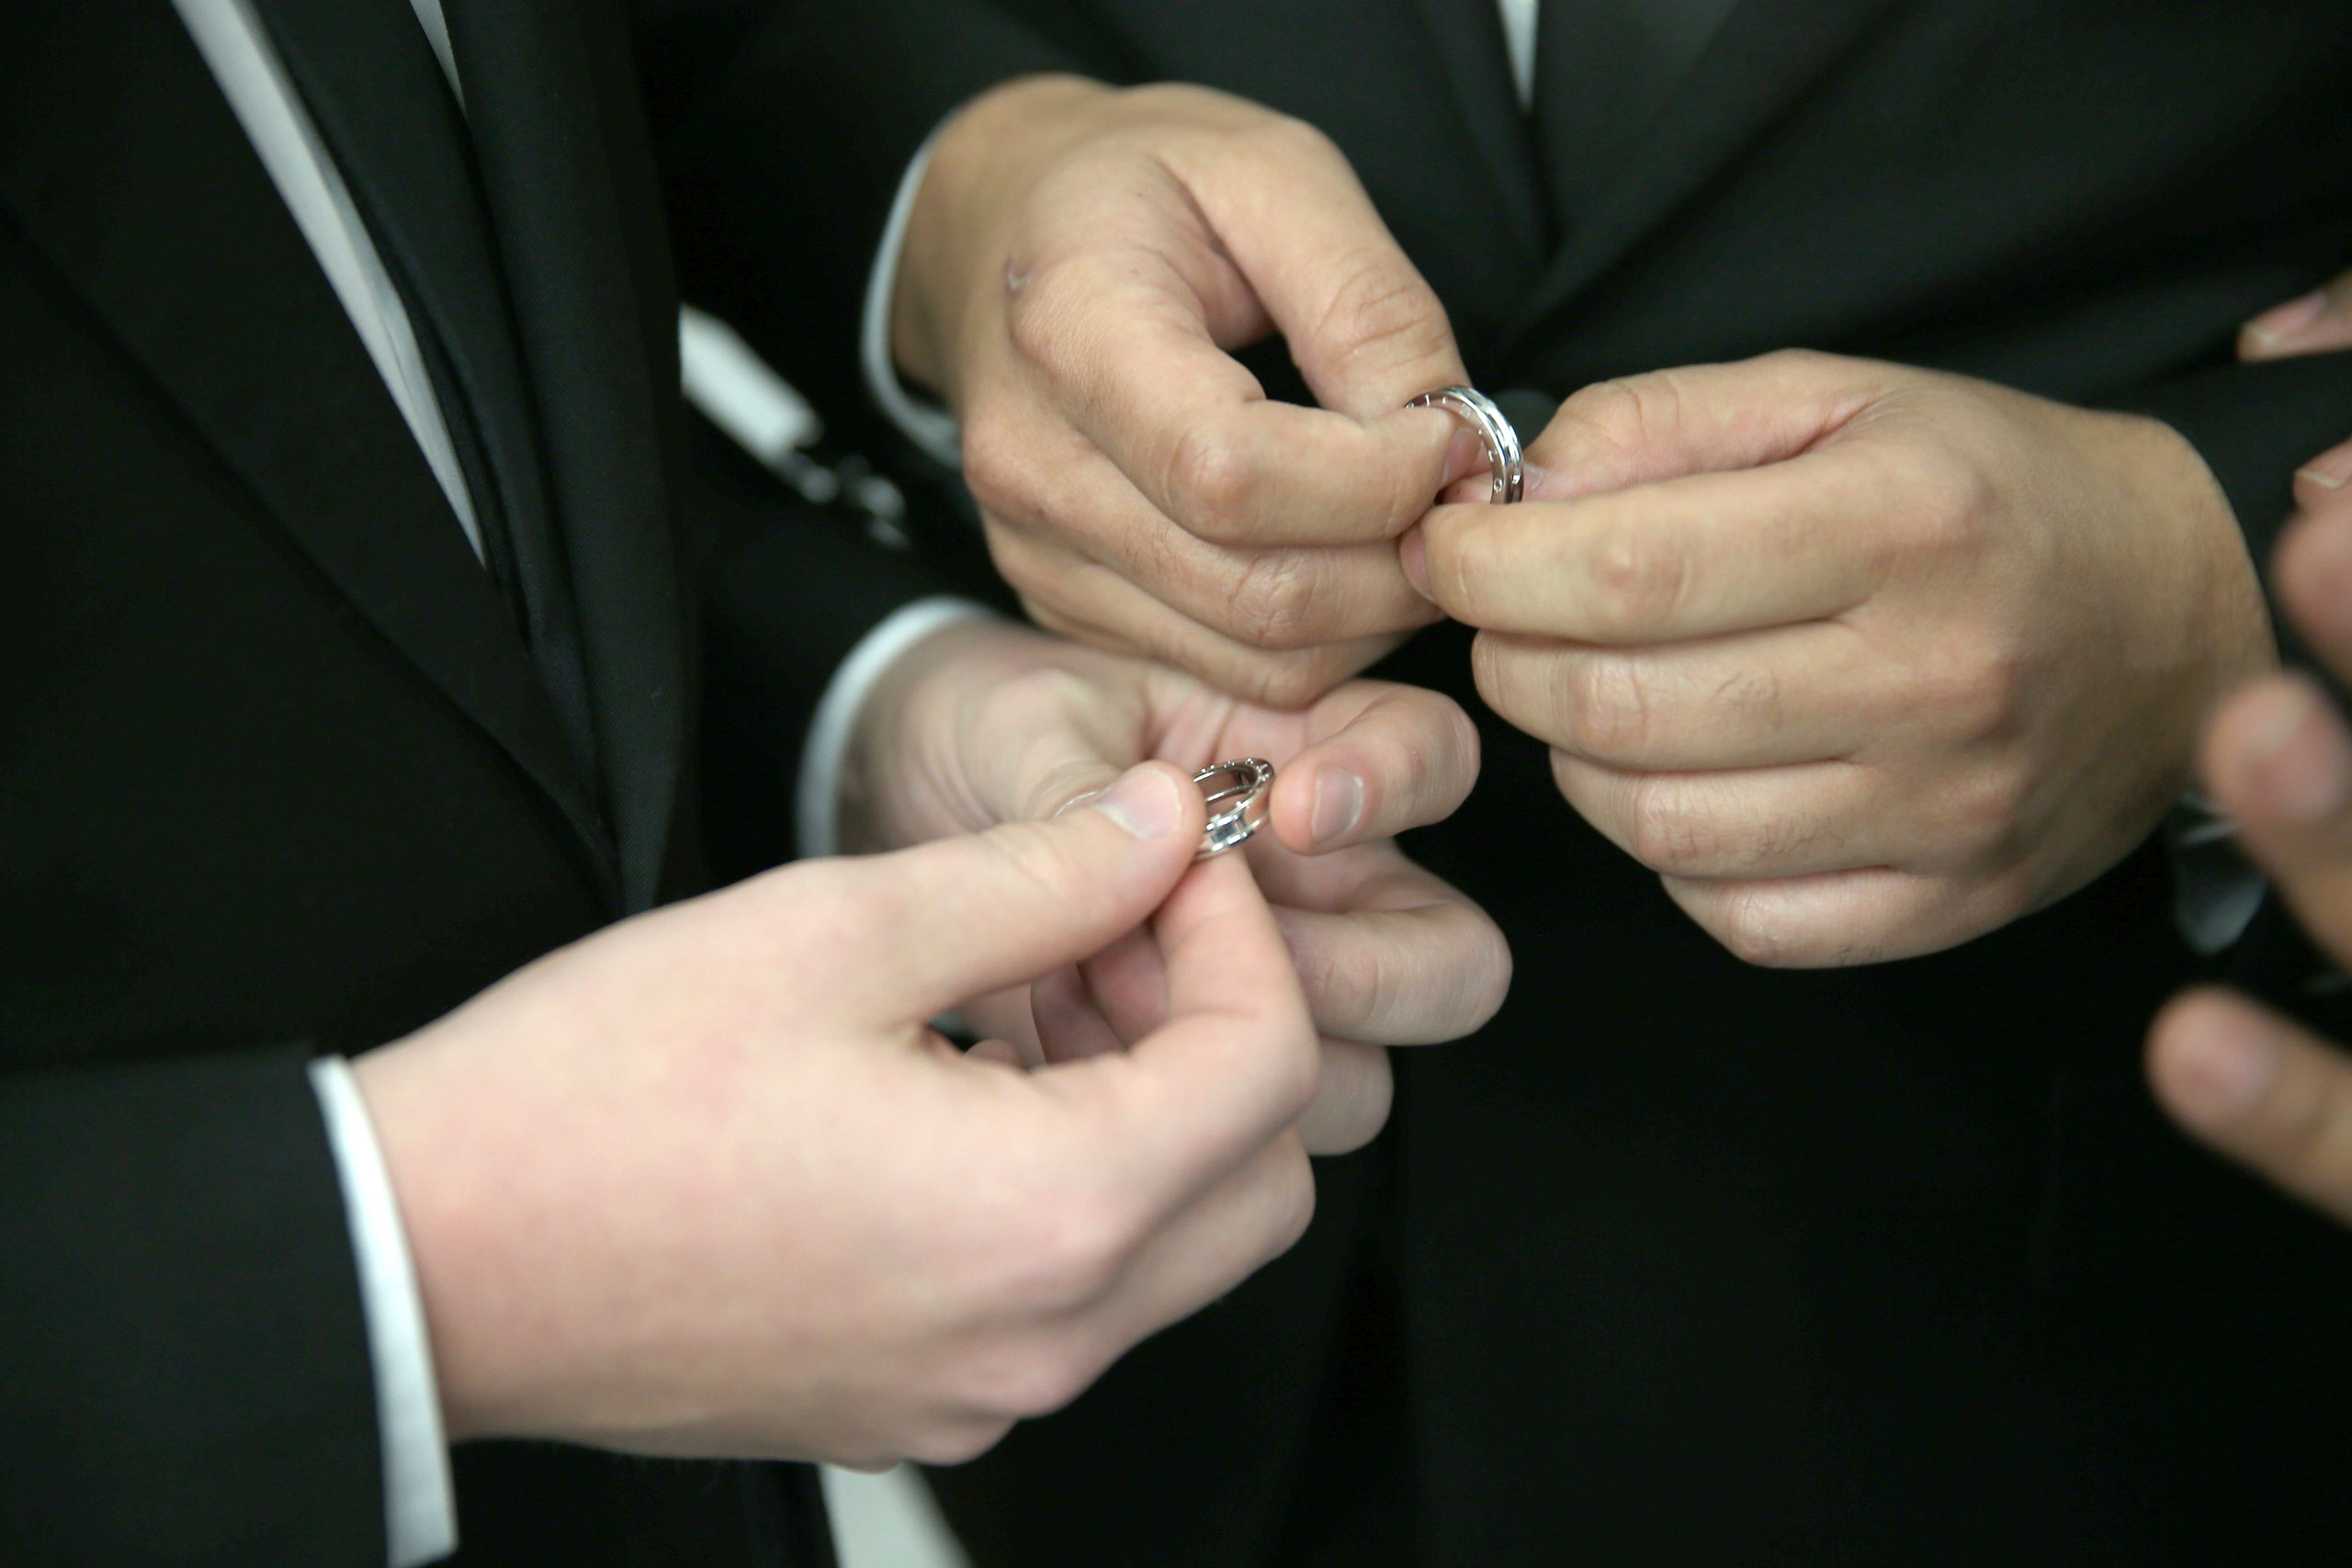 A couple exchange rings as they are wed during a wedding ceremony at the Broward County Courthouse on Jan. 6, 2015 in Fort Lauderdale, Fla